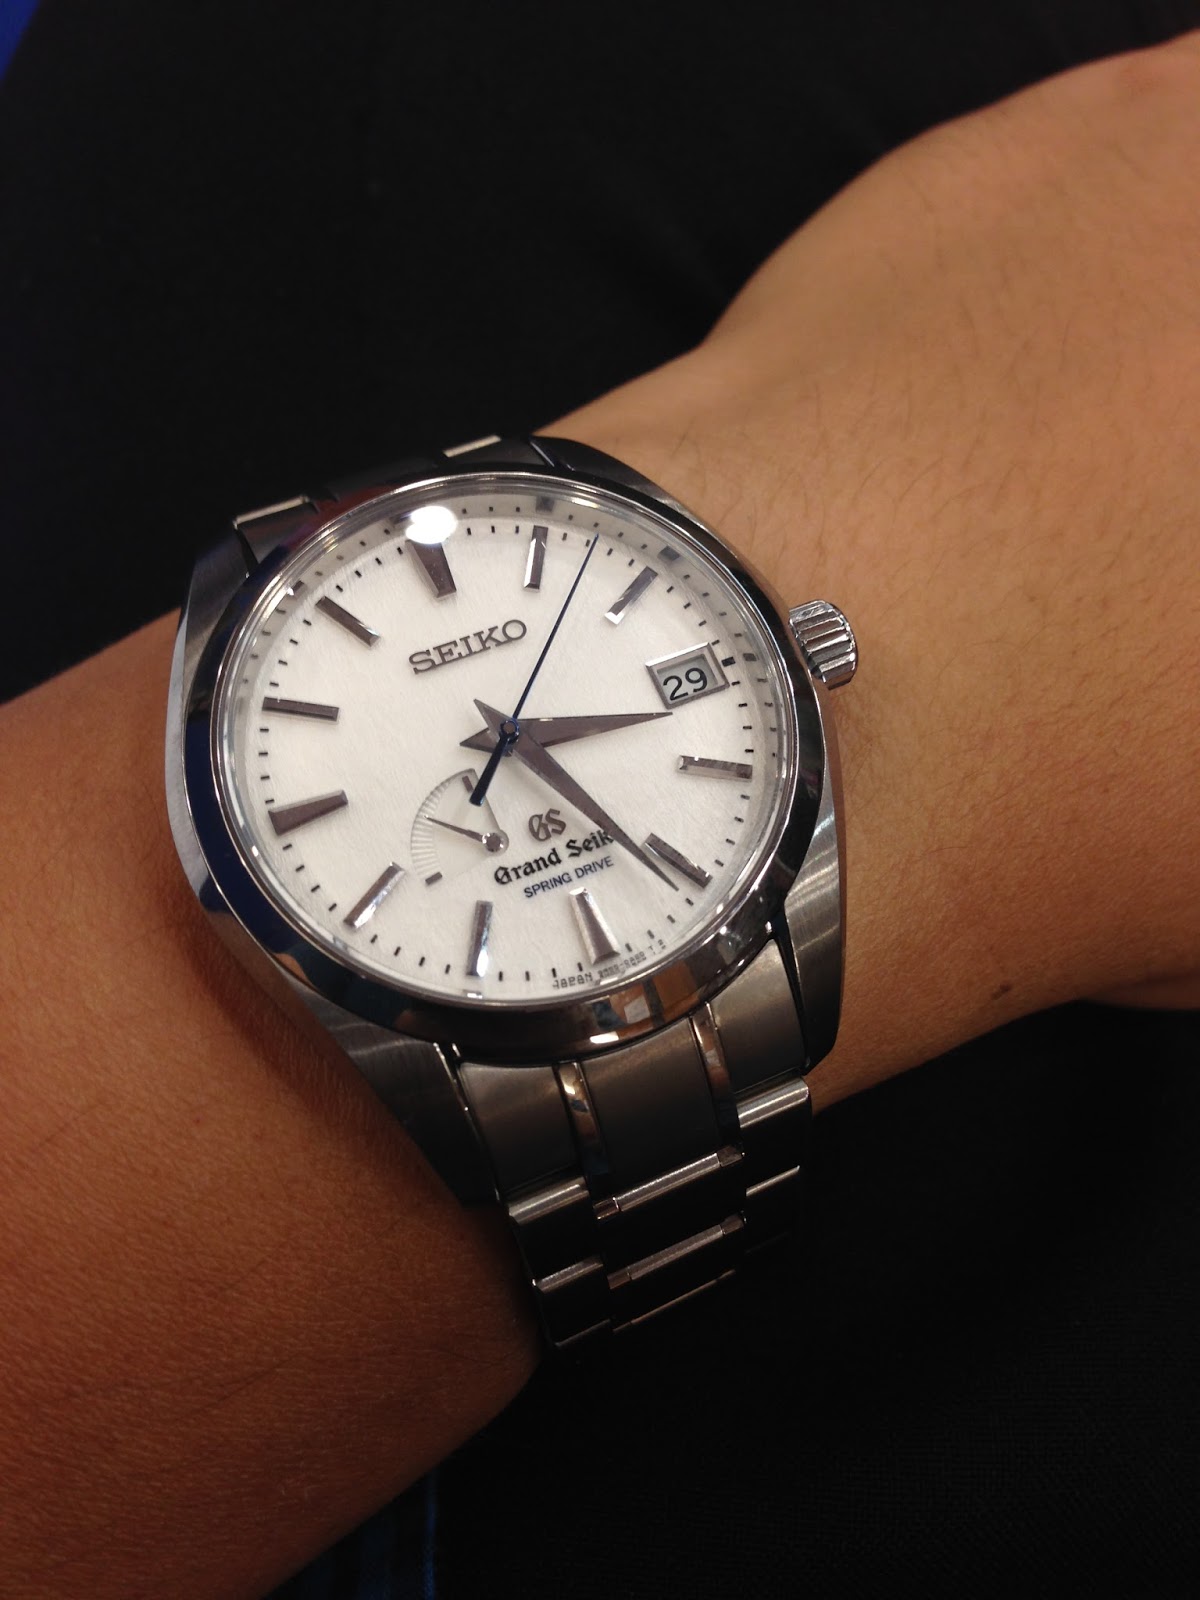 A Fortnight Review: 2 Weeks With Seiko's Grand Seiko SBGA011 Spring Drive “ Snowflake” Watch